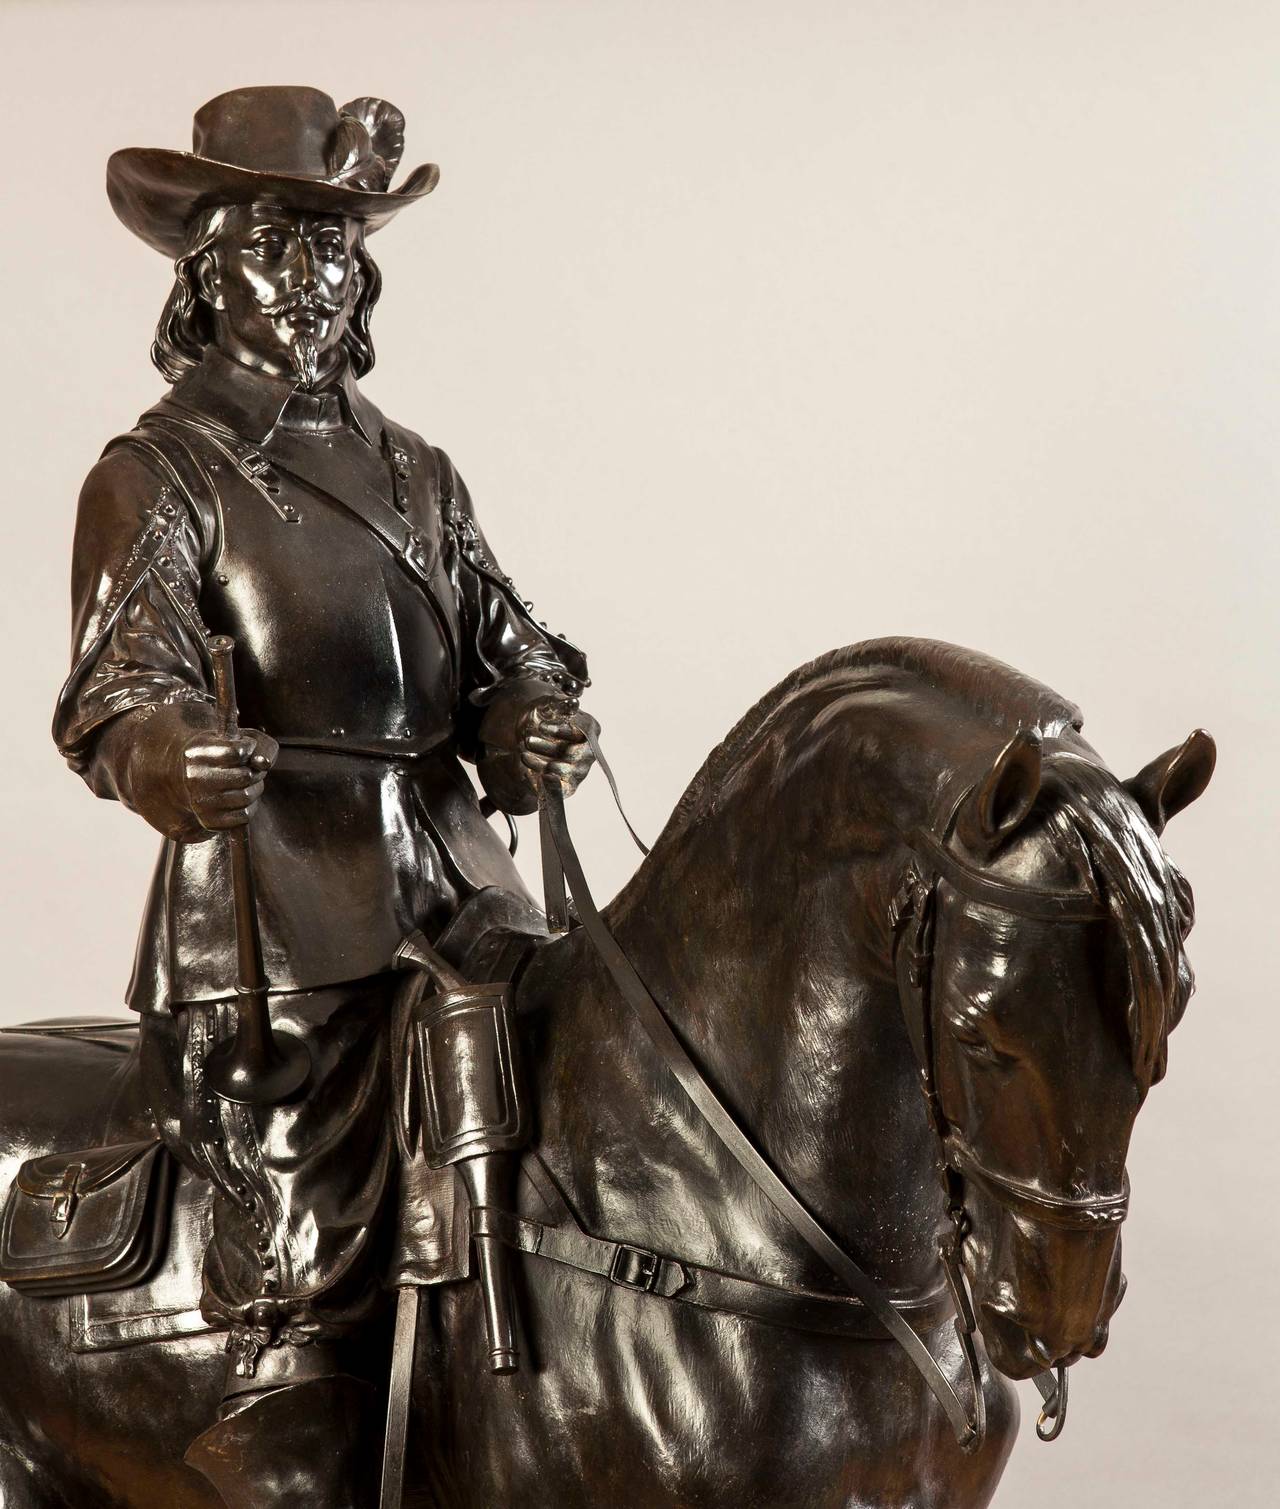 A Superb Equestrian Statue of a Musketeer, by Isidore-Jules Bonheur

Beautifully cast and planished by Hippolyte Peyrol, the fondeur, and bearing his signature, the mounted musketeer, wearing a uniform of the 1690-1710 period is astride his mount,